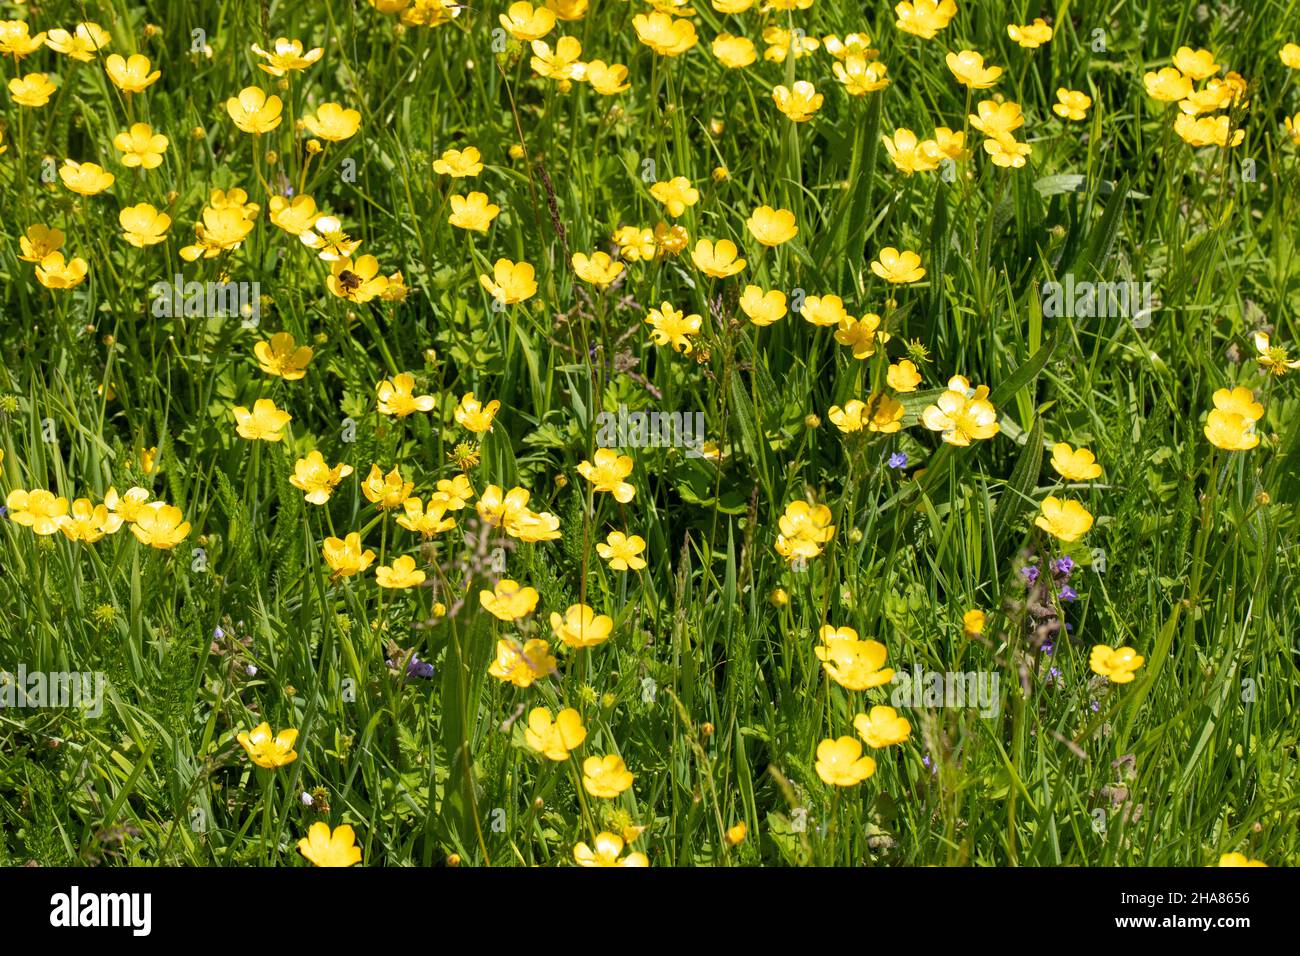 Buttercups. (Ranunculus sp. ) Blend of yellow and green herbaceous sward, grassland, with smattering of blue Speedwell (Veronica ). Church graveyard Stock Photo